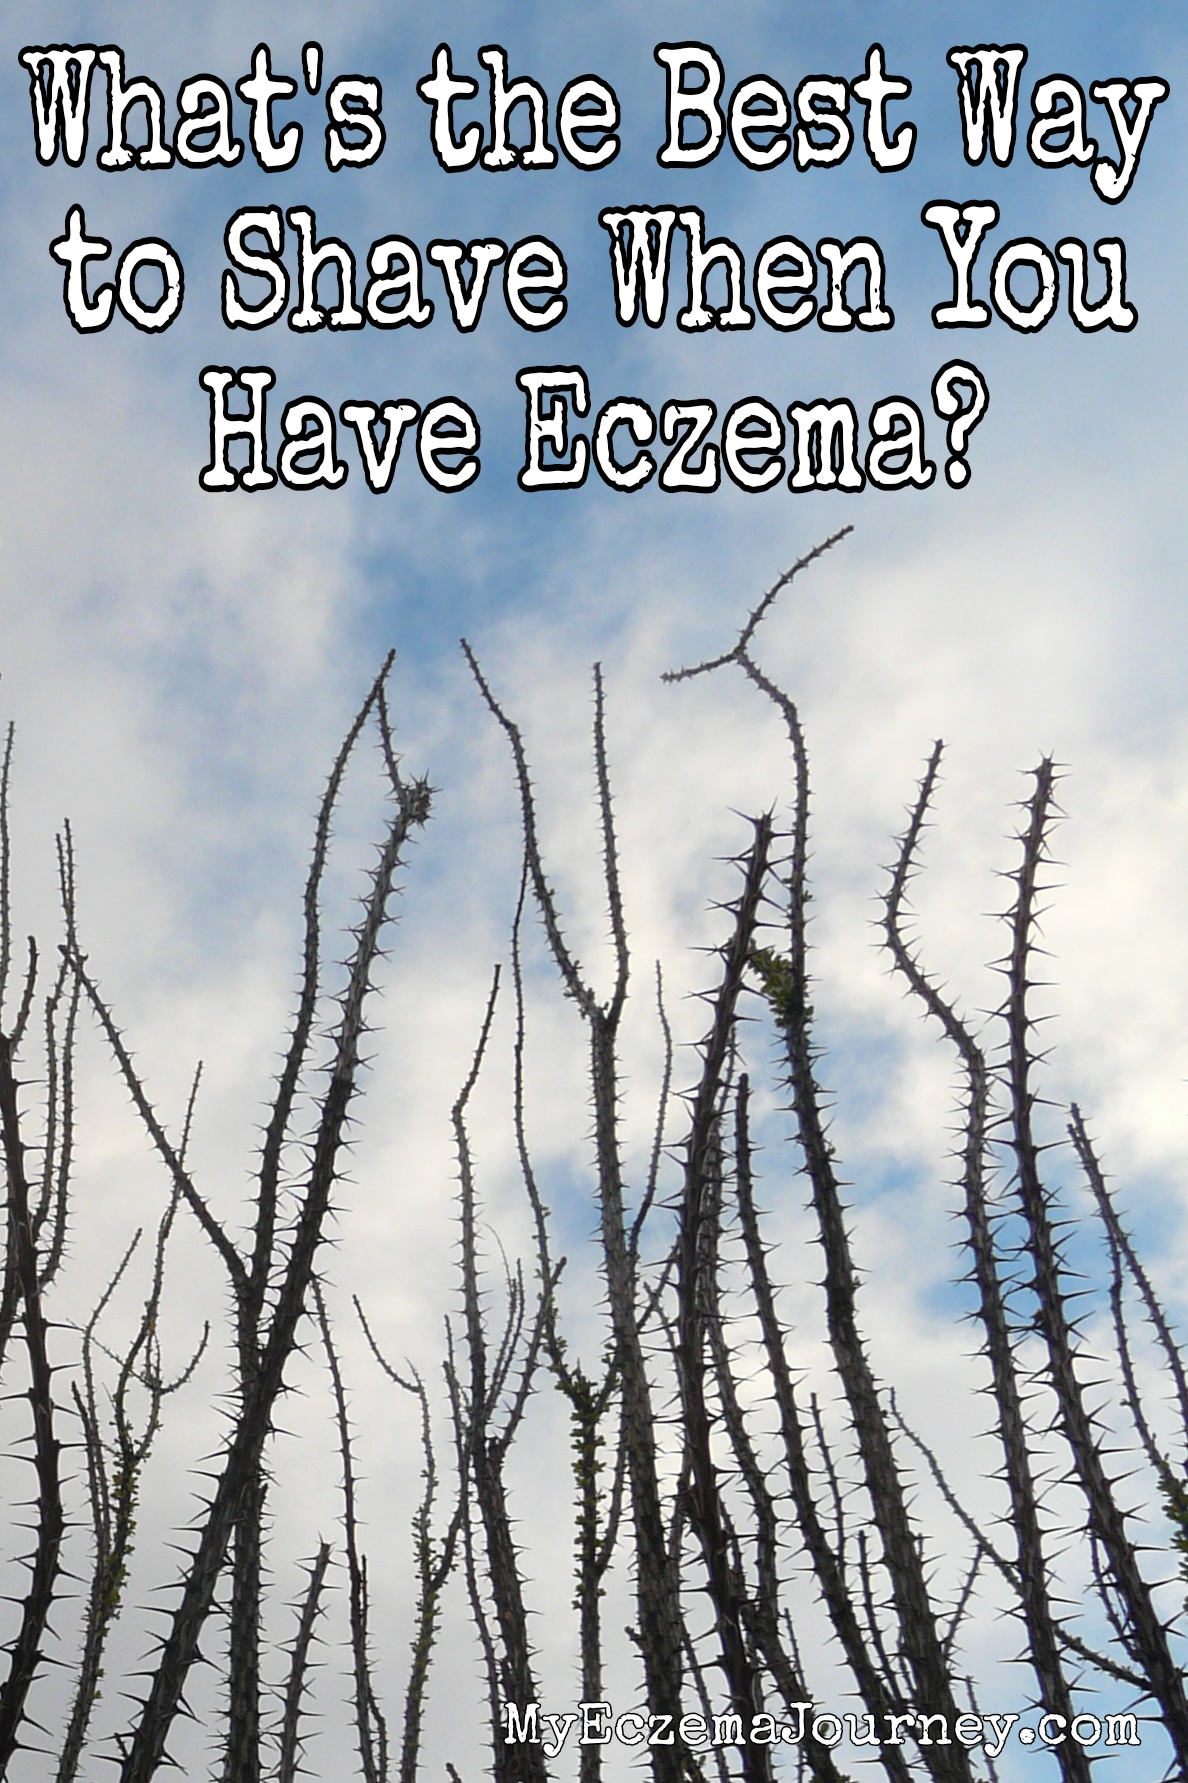 siny cactus against blue sky with text overlay: What's the best way to shave when you have eczema?